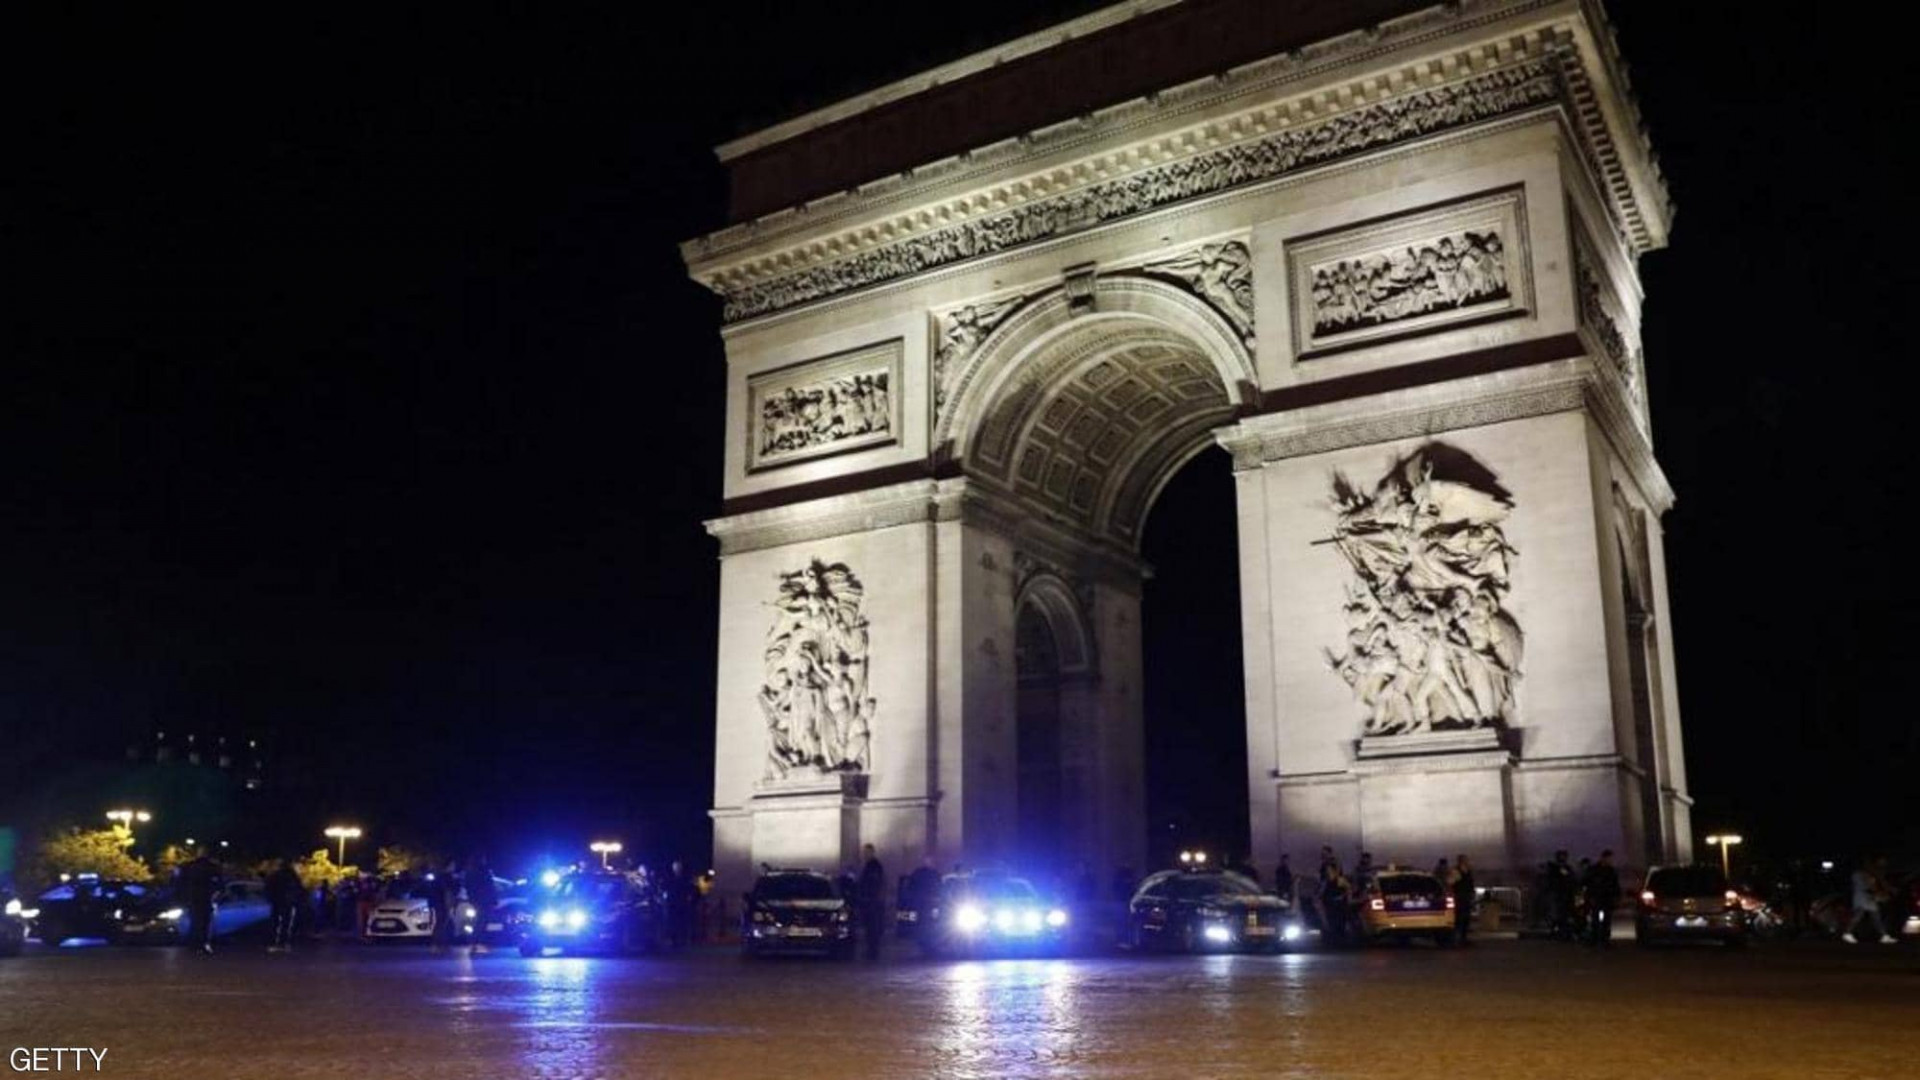 Police fire on car in central Paris killing two people